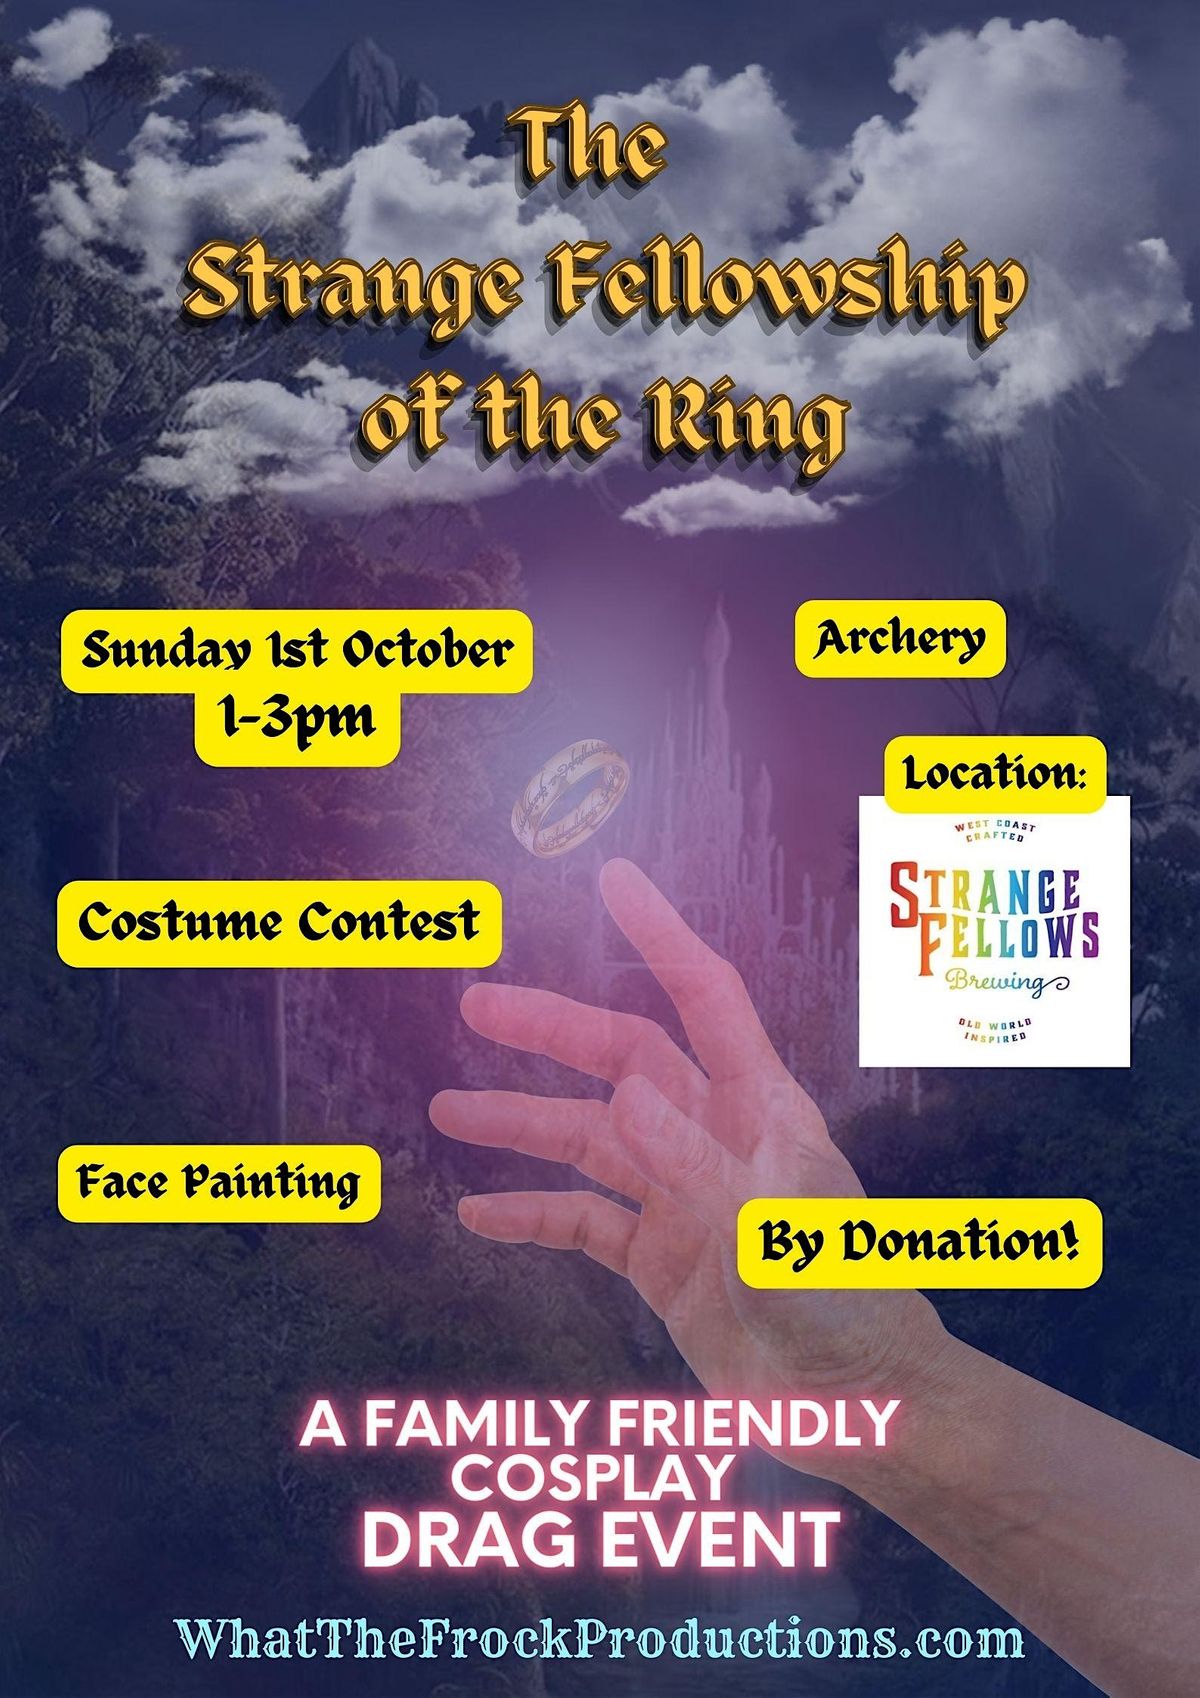 The Strange Fellowship of the Ring - A Cosplay Family-Friendly Drag Event